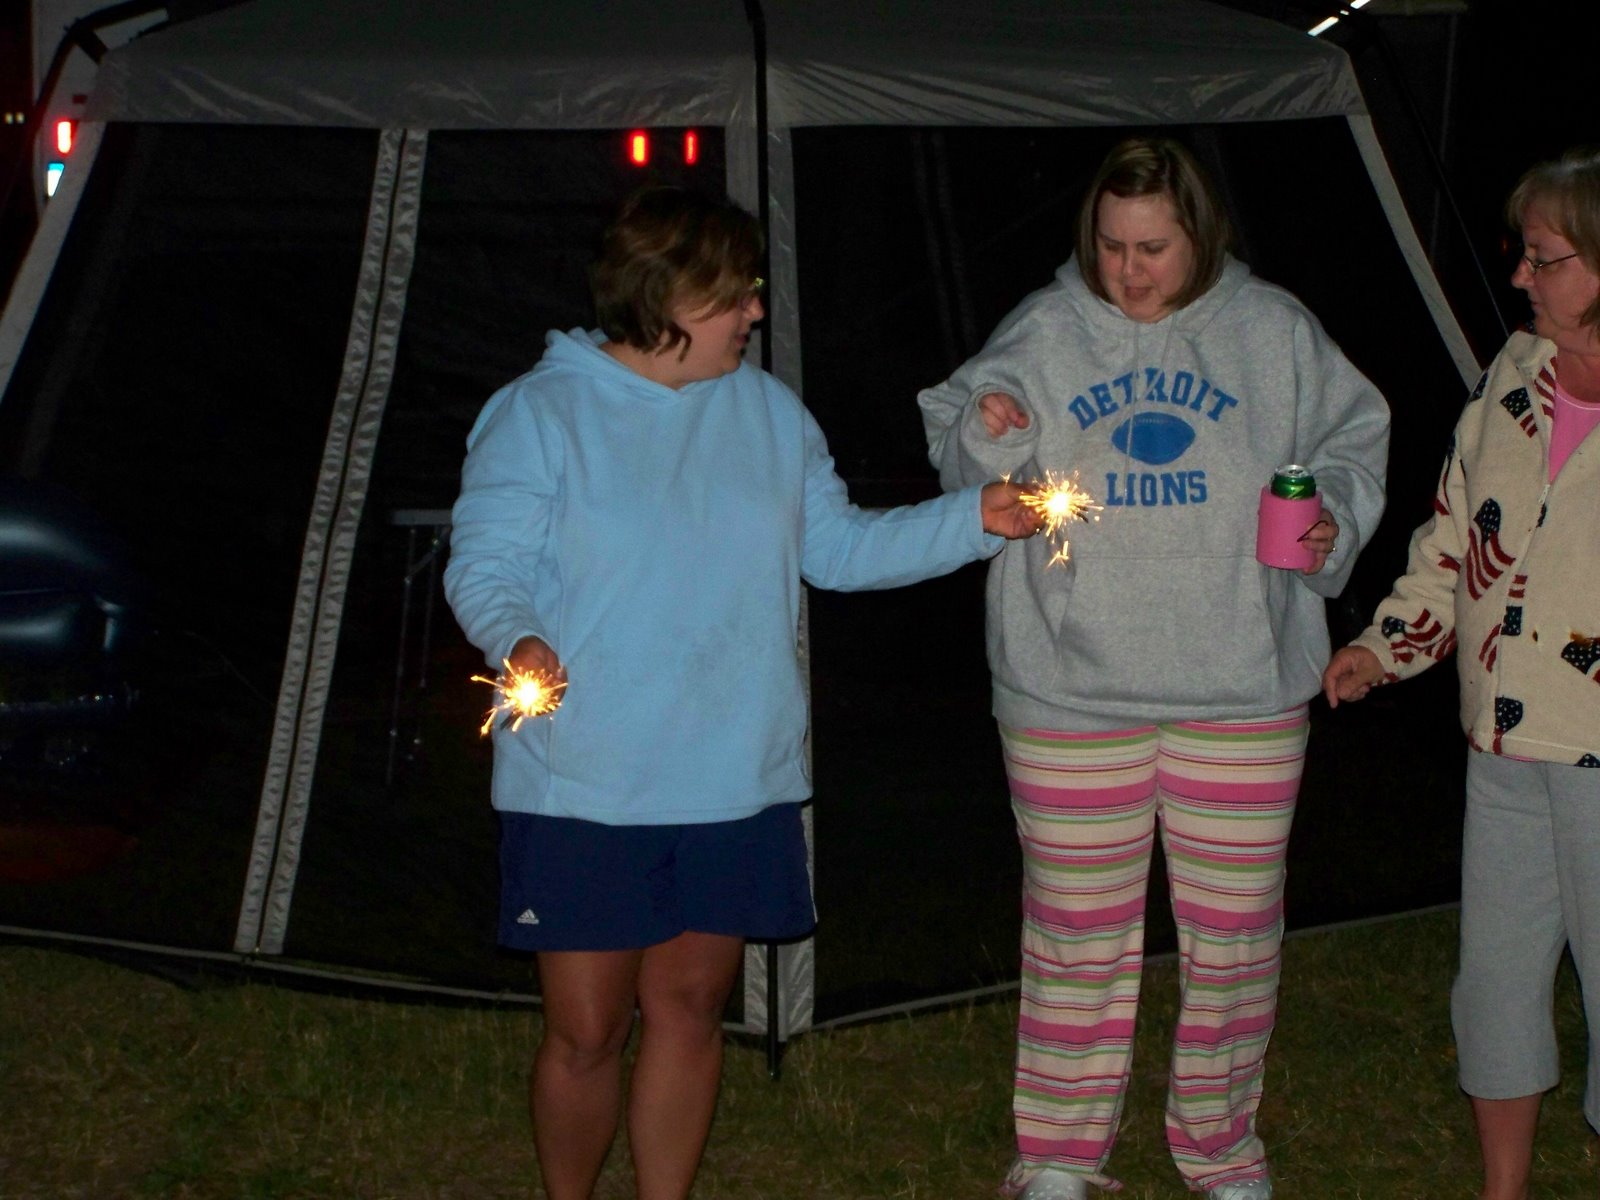 [Auntie+Robynn+is+scared+of+sparklers.jpg]